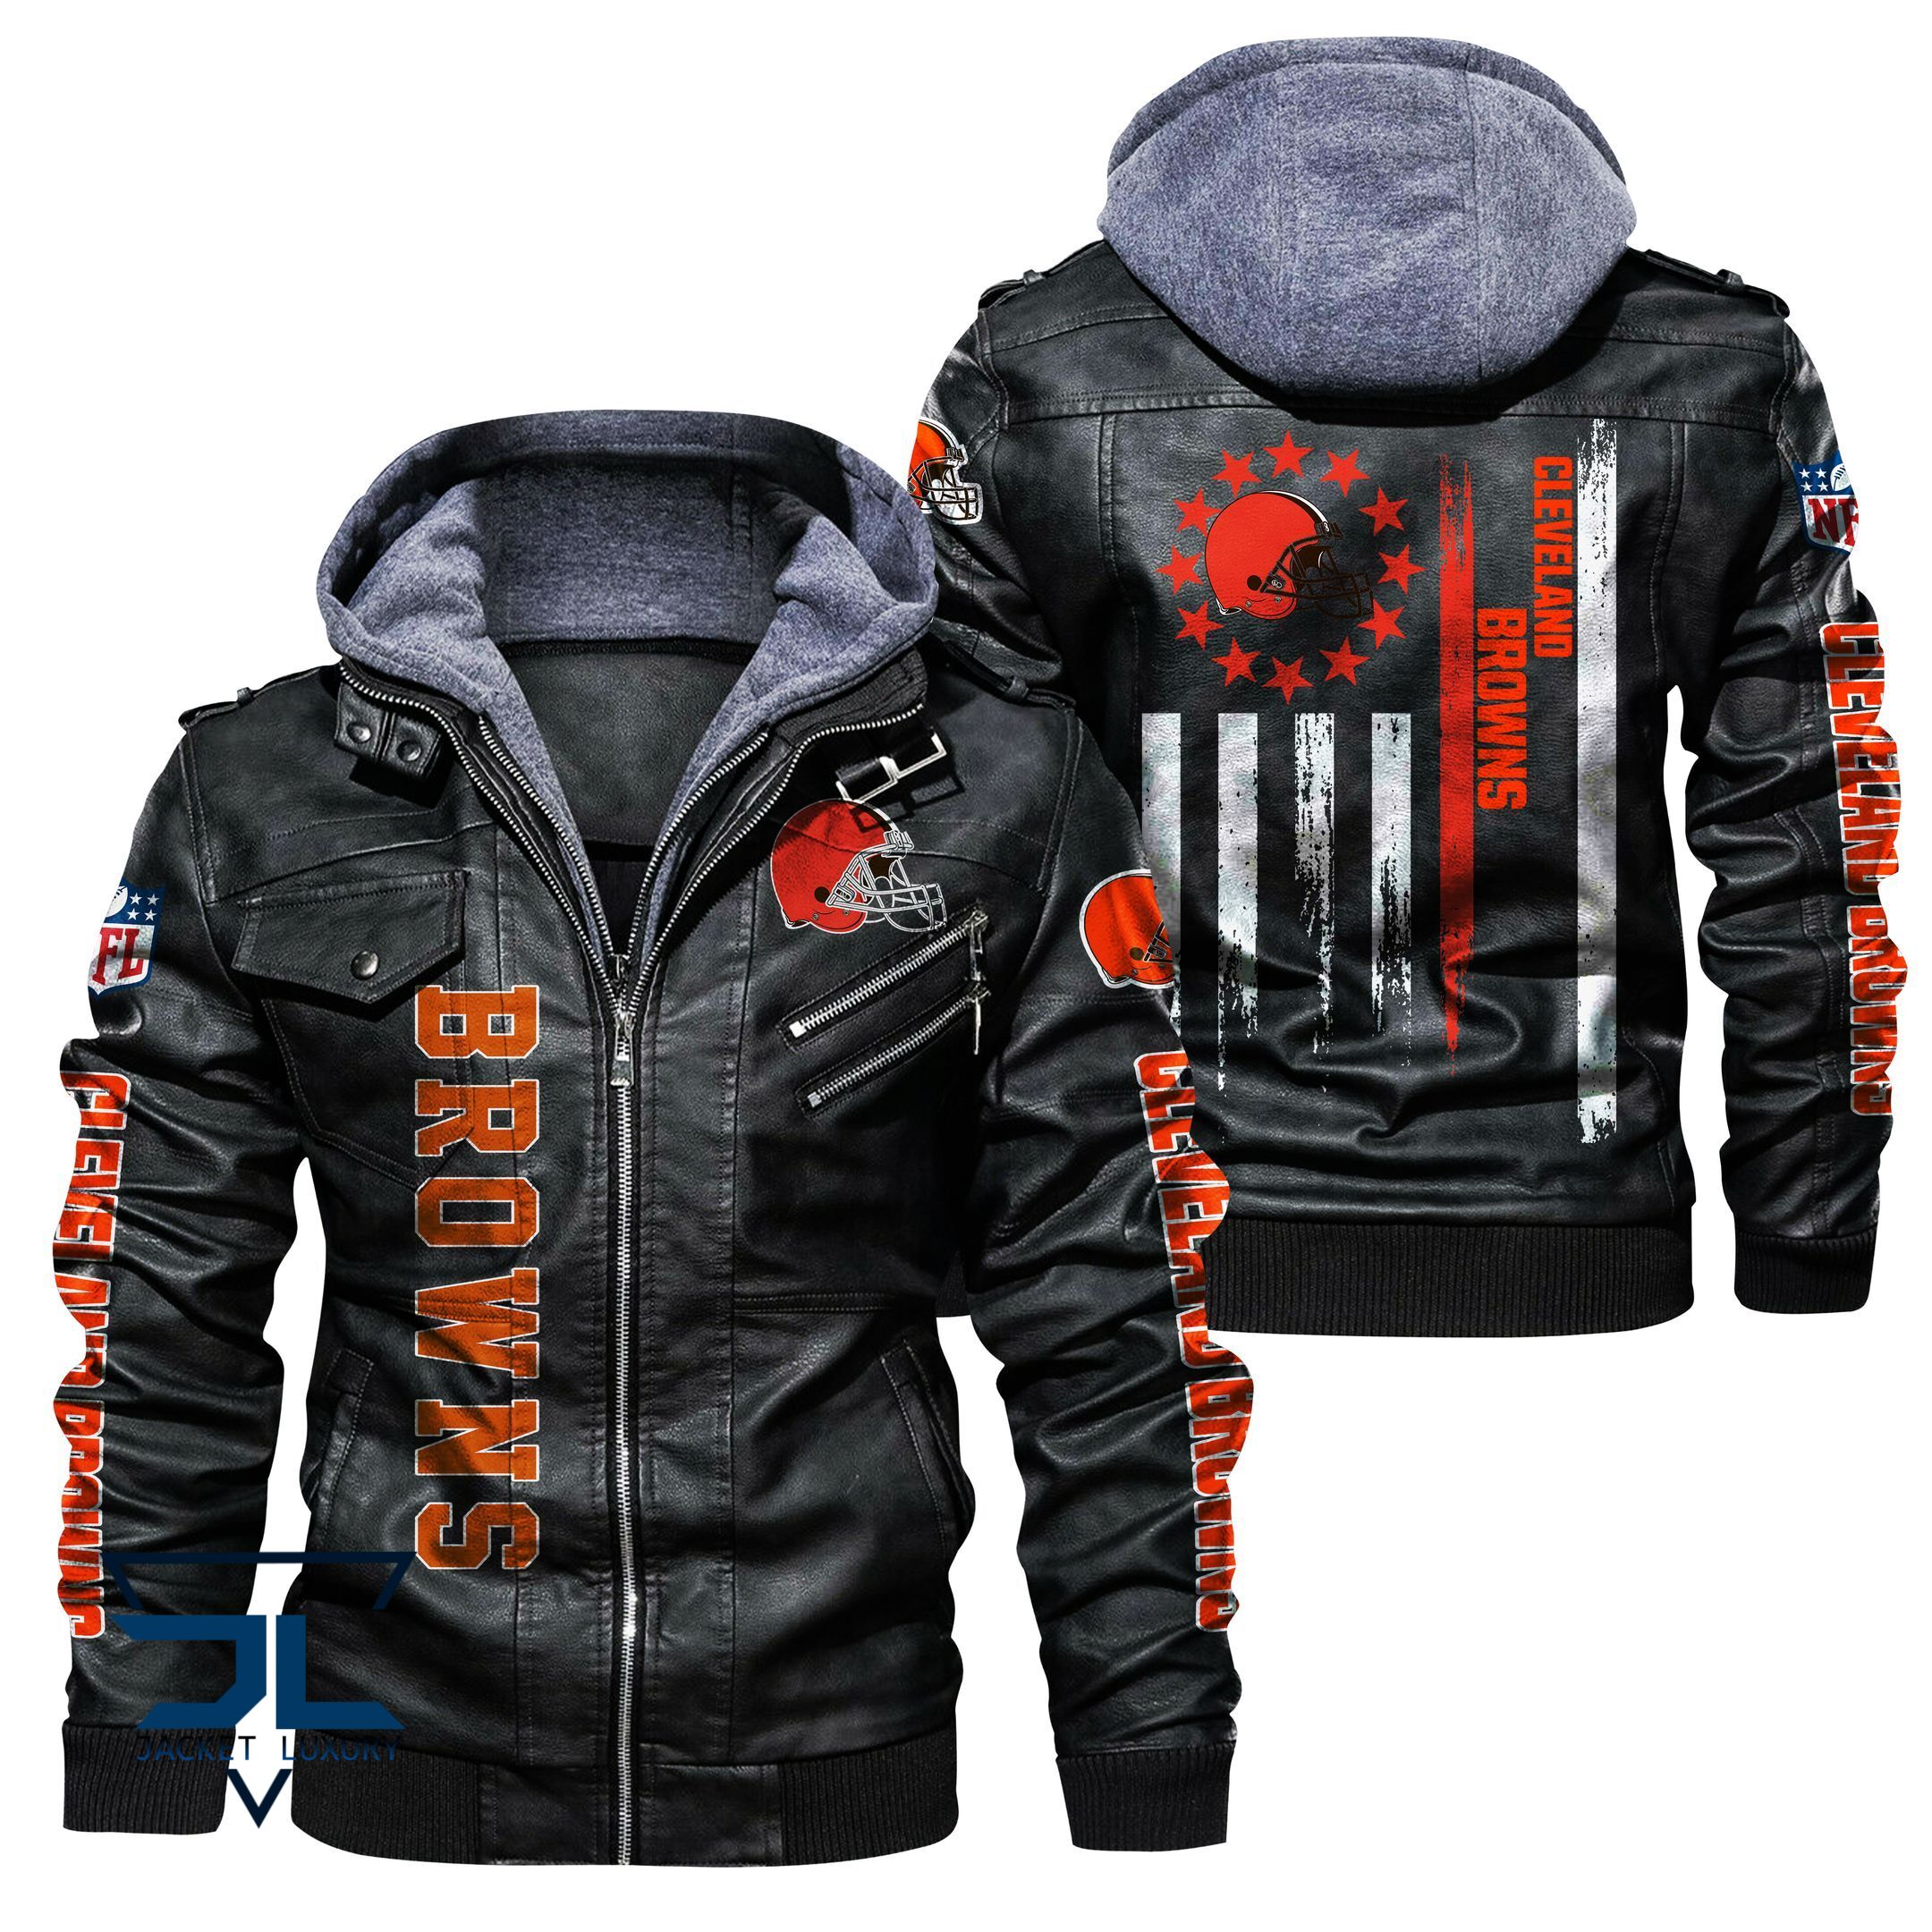 100+ best selling leather jacket on Tezostore 2022 53